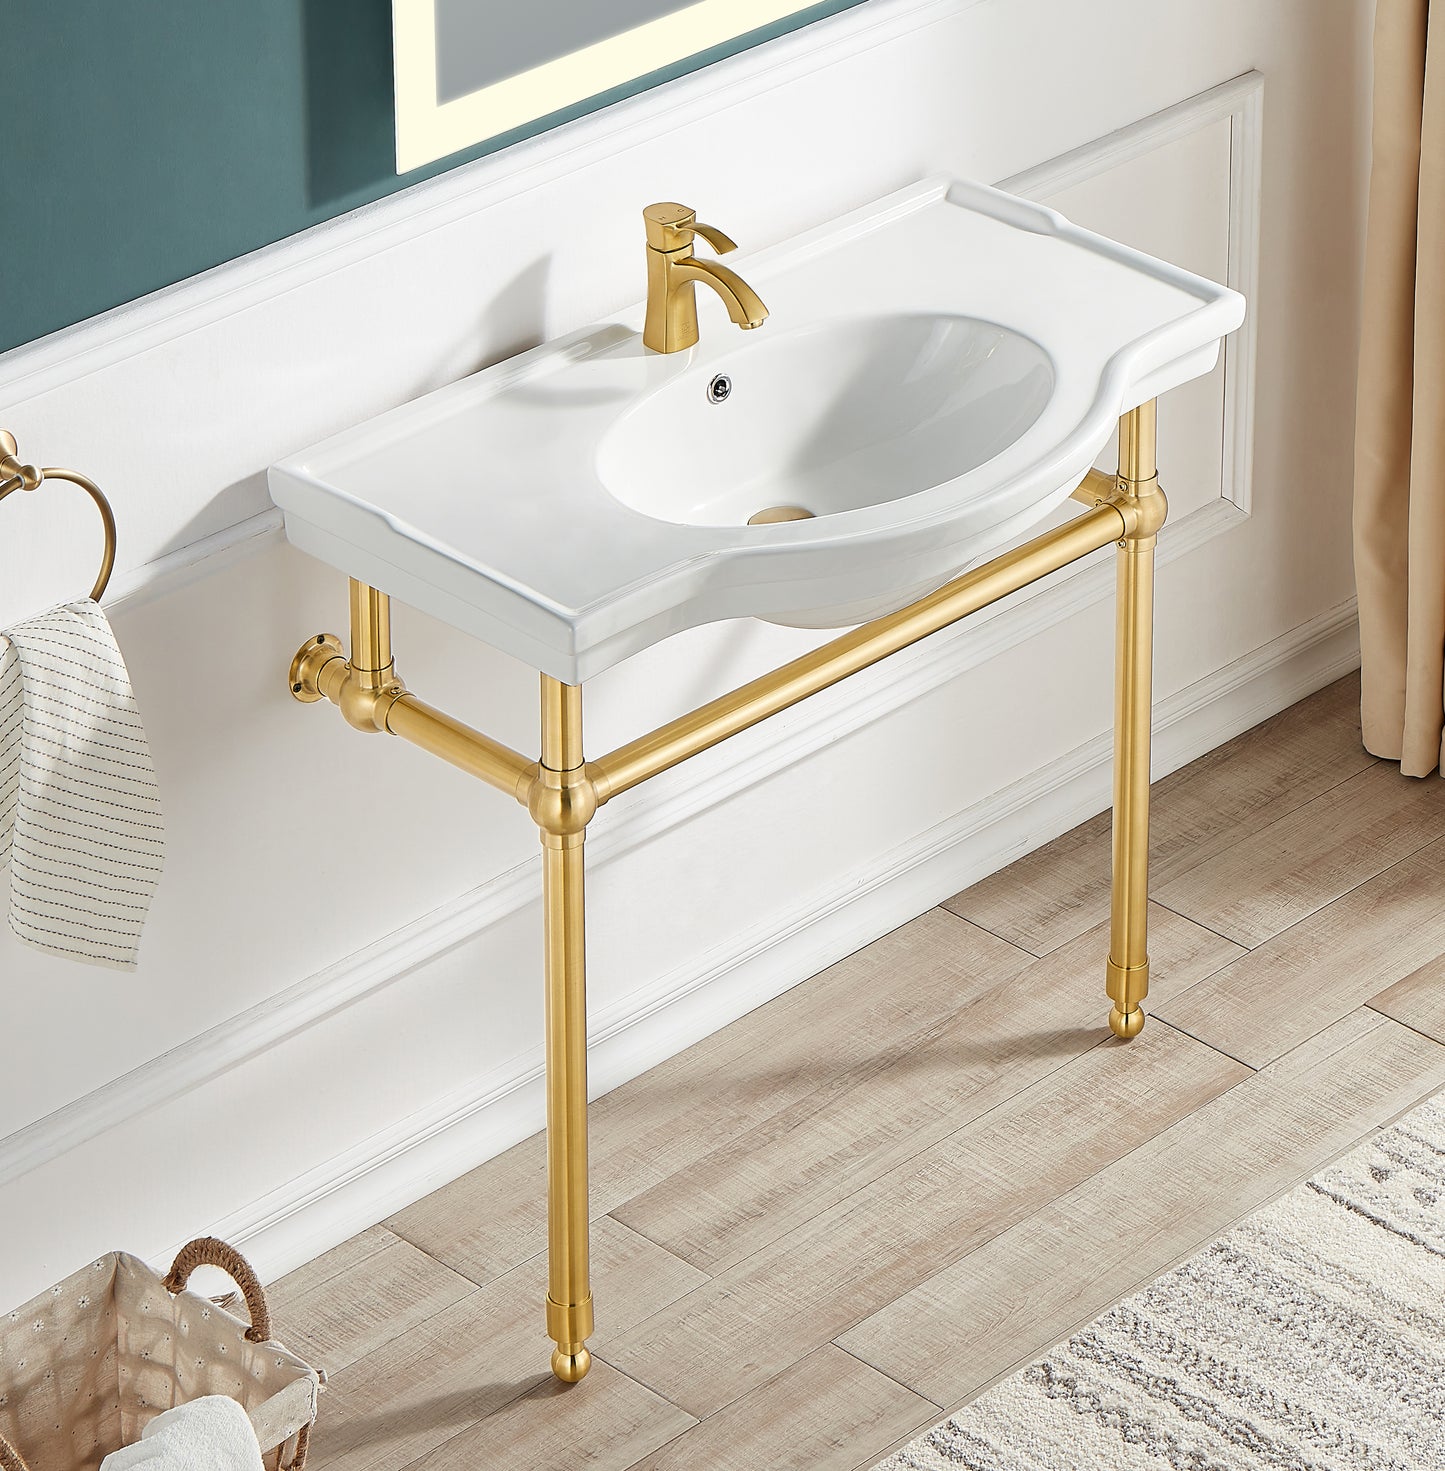 CS-FGC003-BG - Viola 34.5 in. Console Sink in Brushed Gold with Ceramic Counter Top